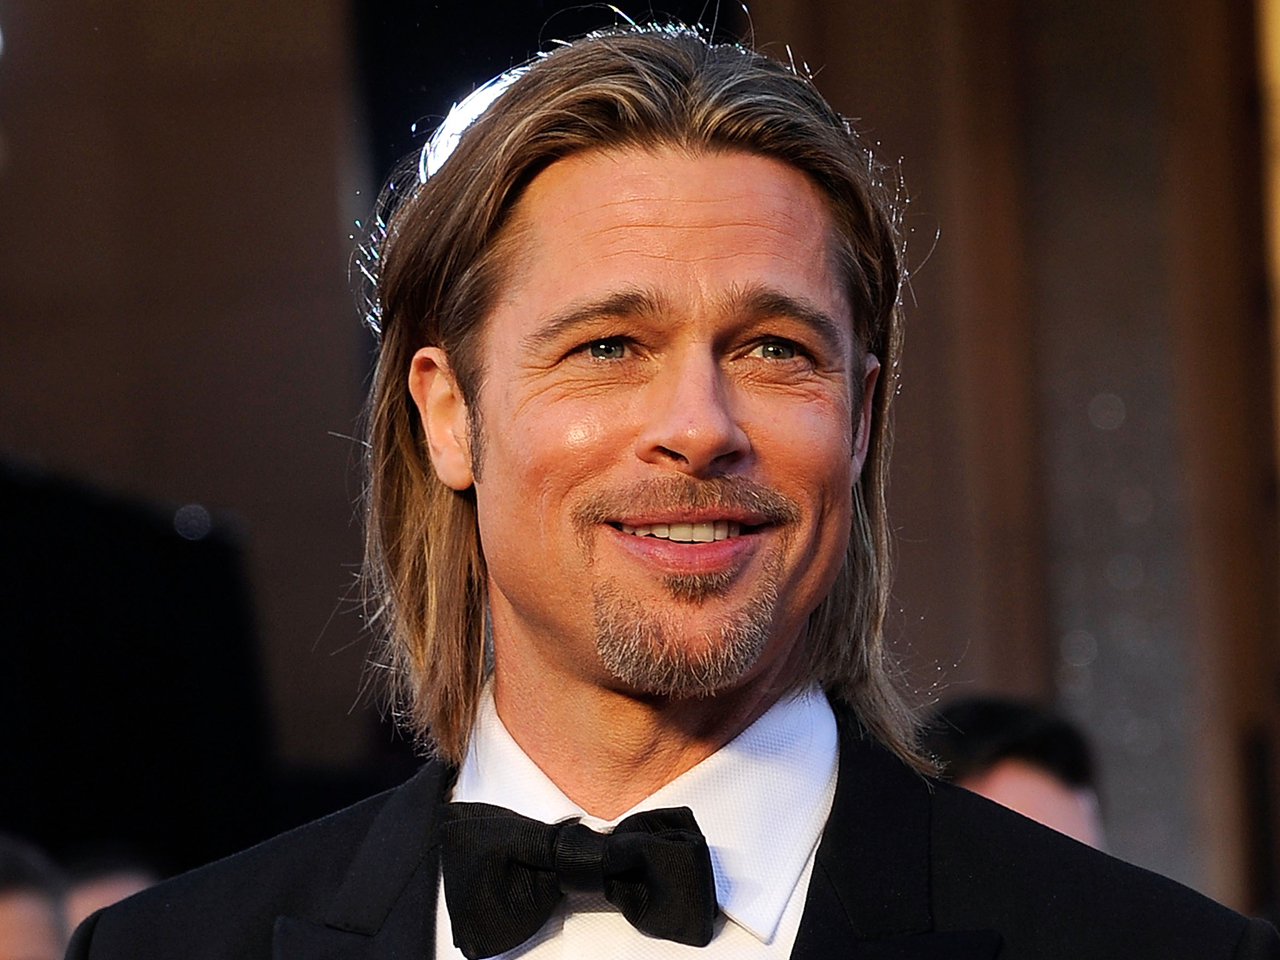 Chanel releases No. 5 campaign with Brad Pitt